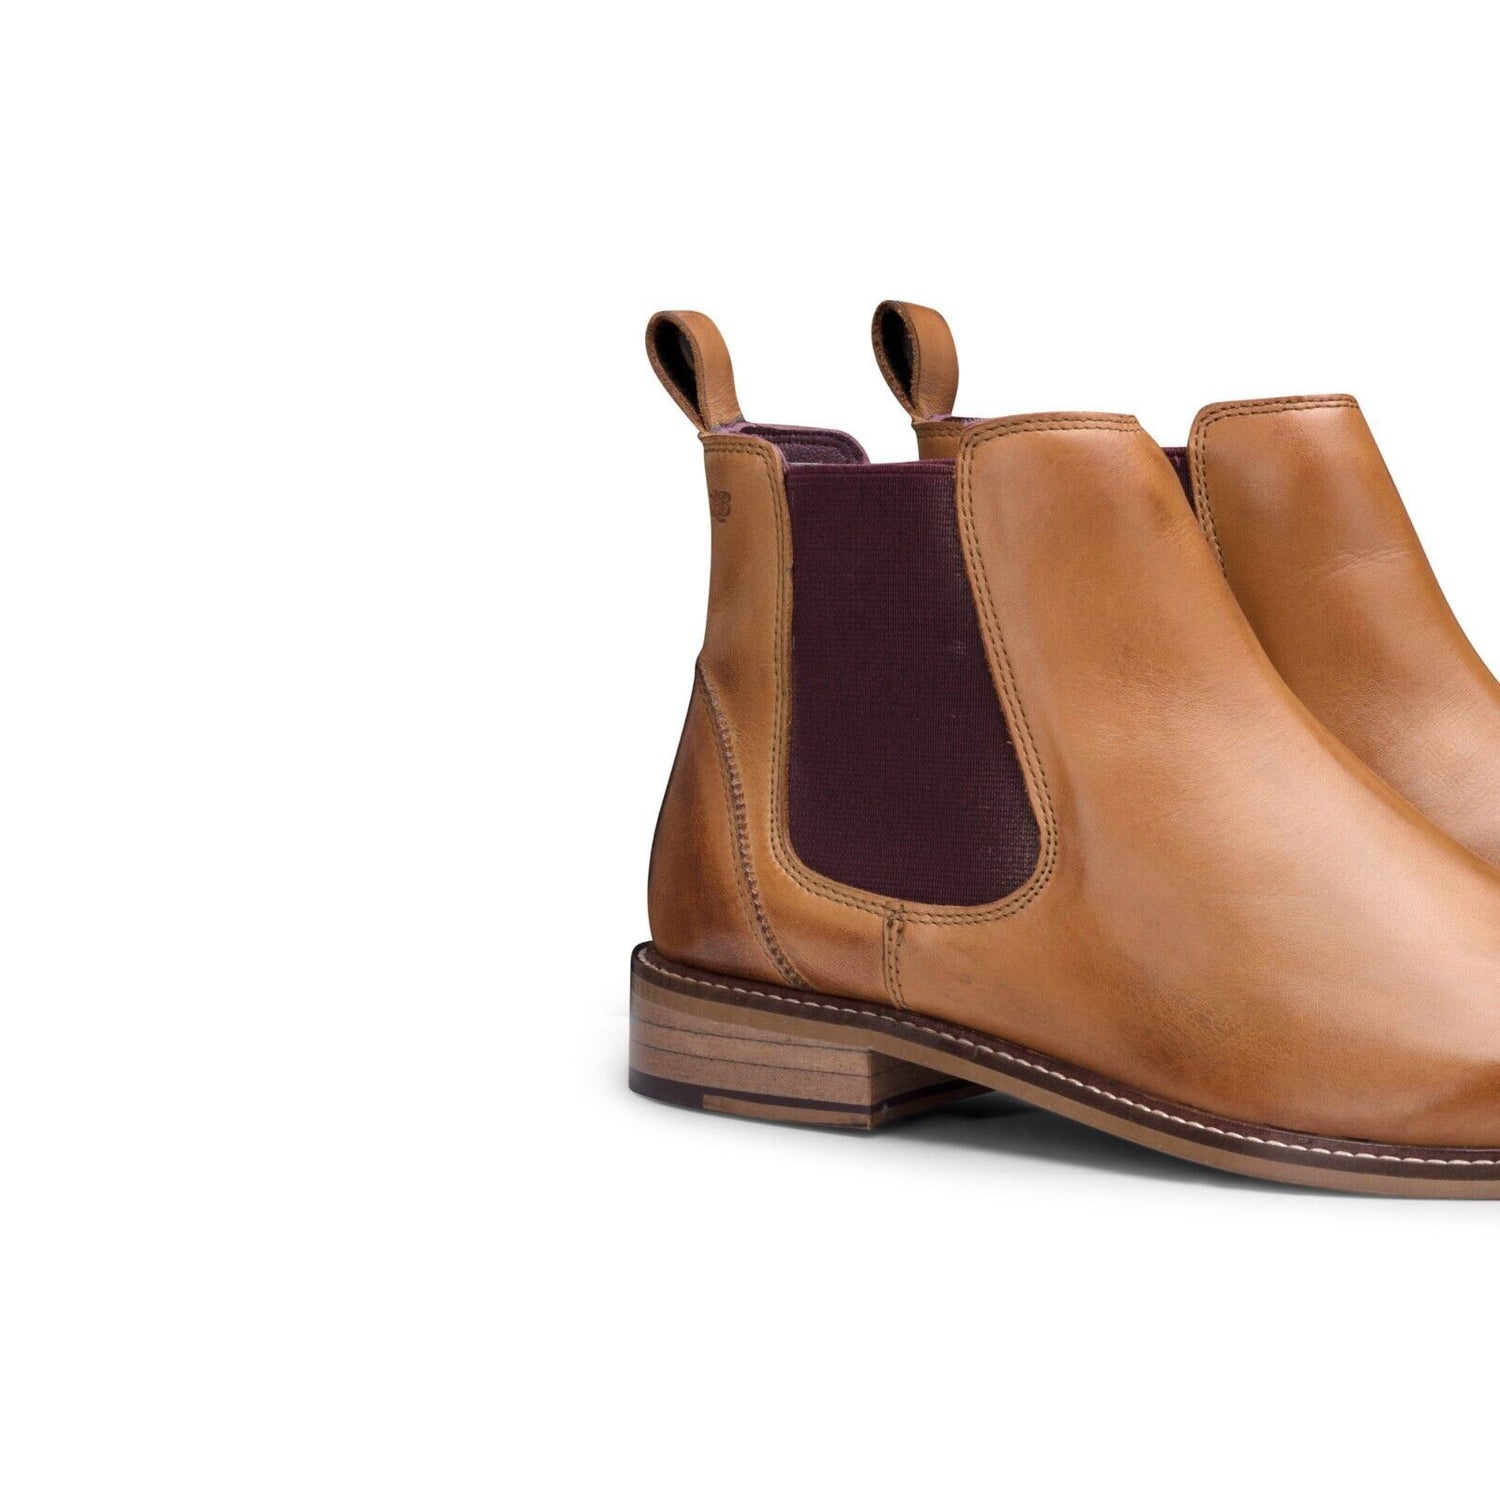 Mens Tan Leather Classic Chelsea Boots - Upperclass Fashions 